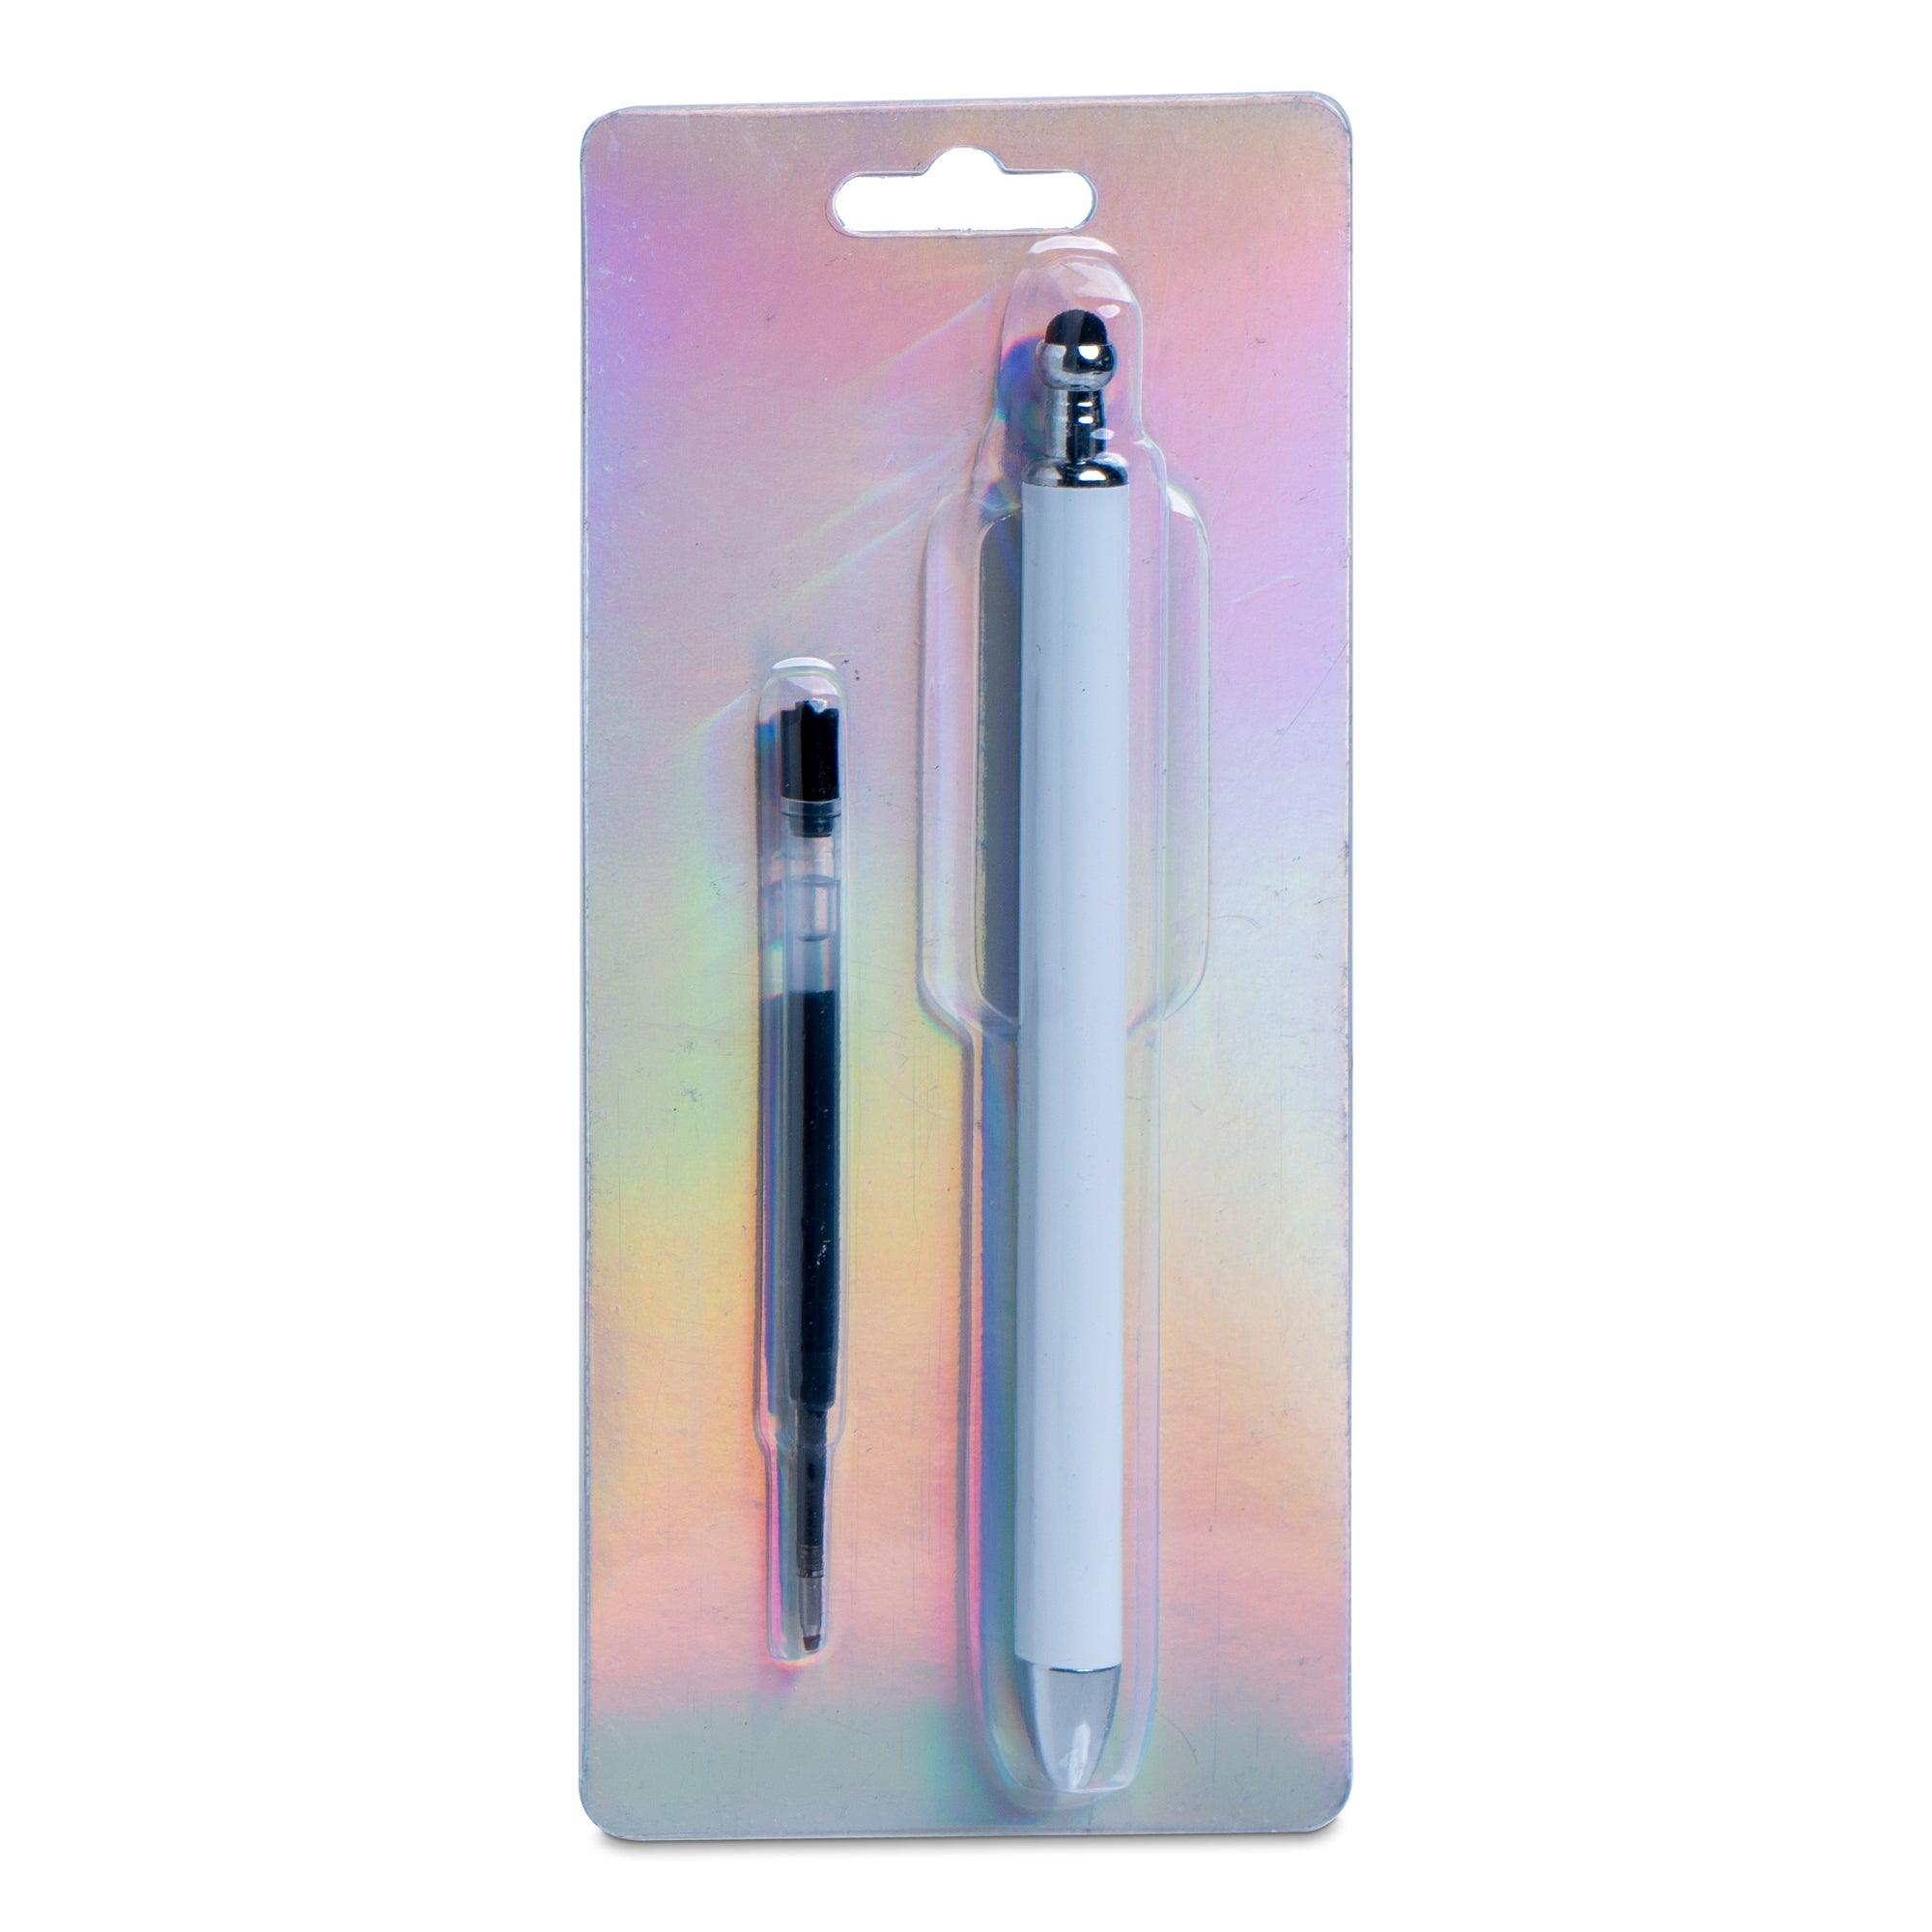 The Crafters Gel Pen/Pack of 12 Pens